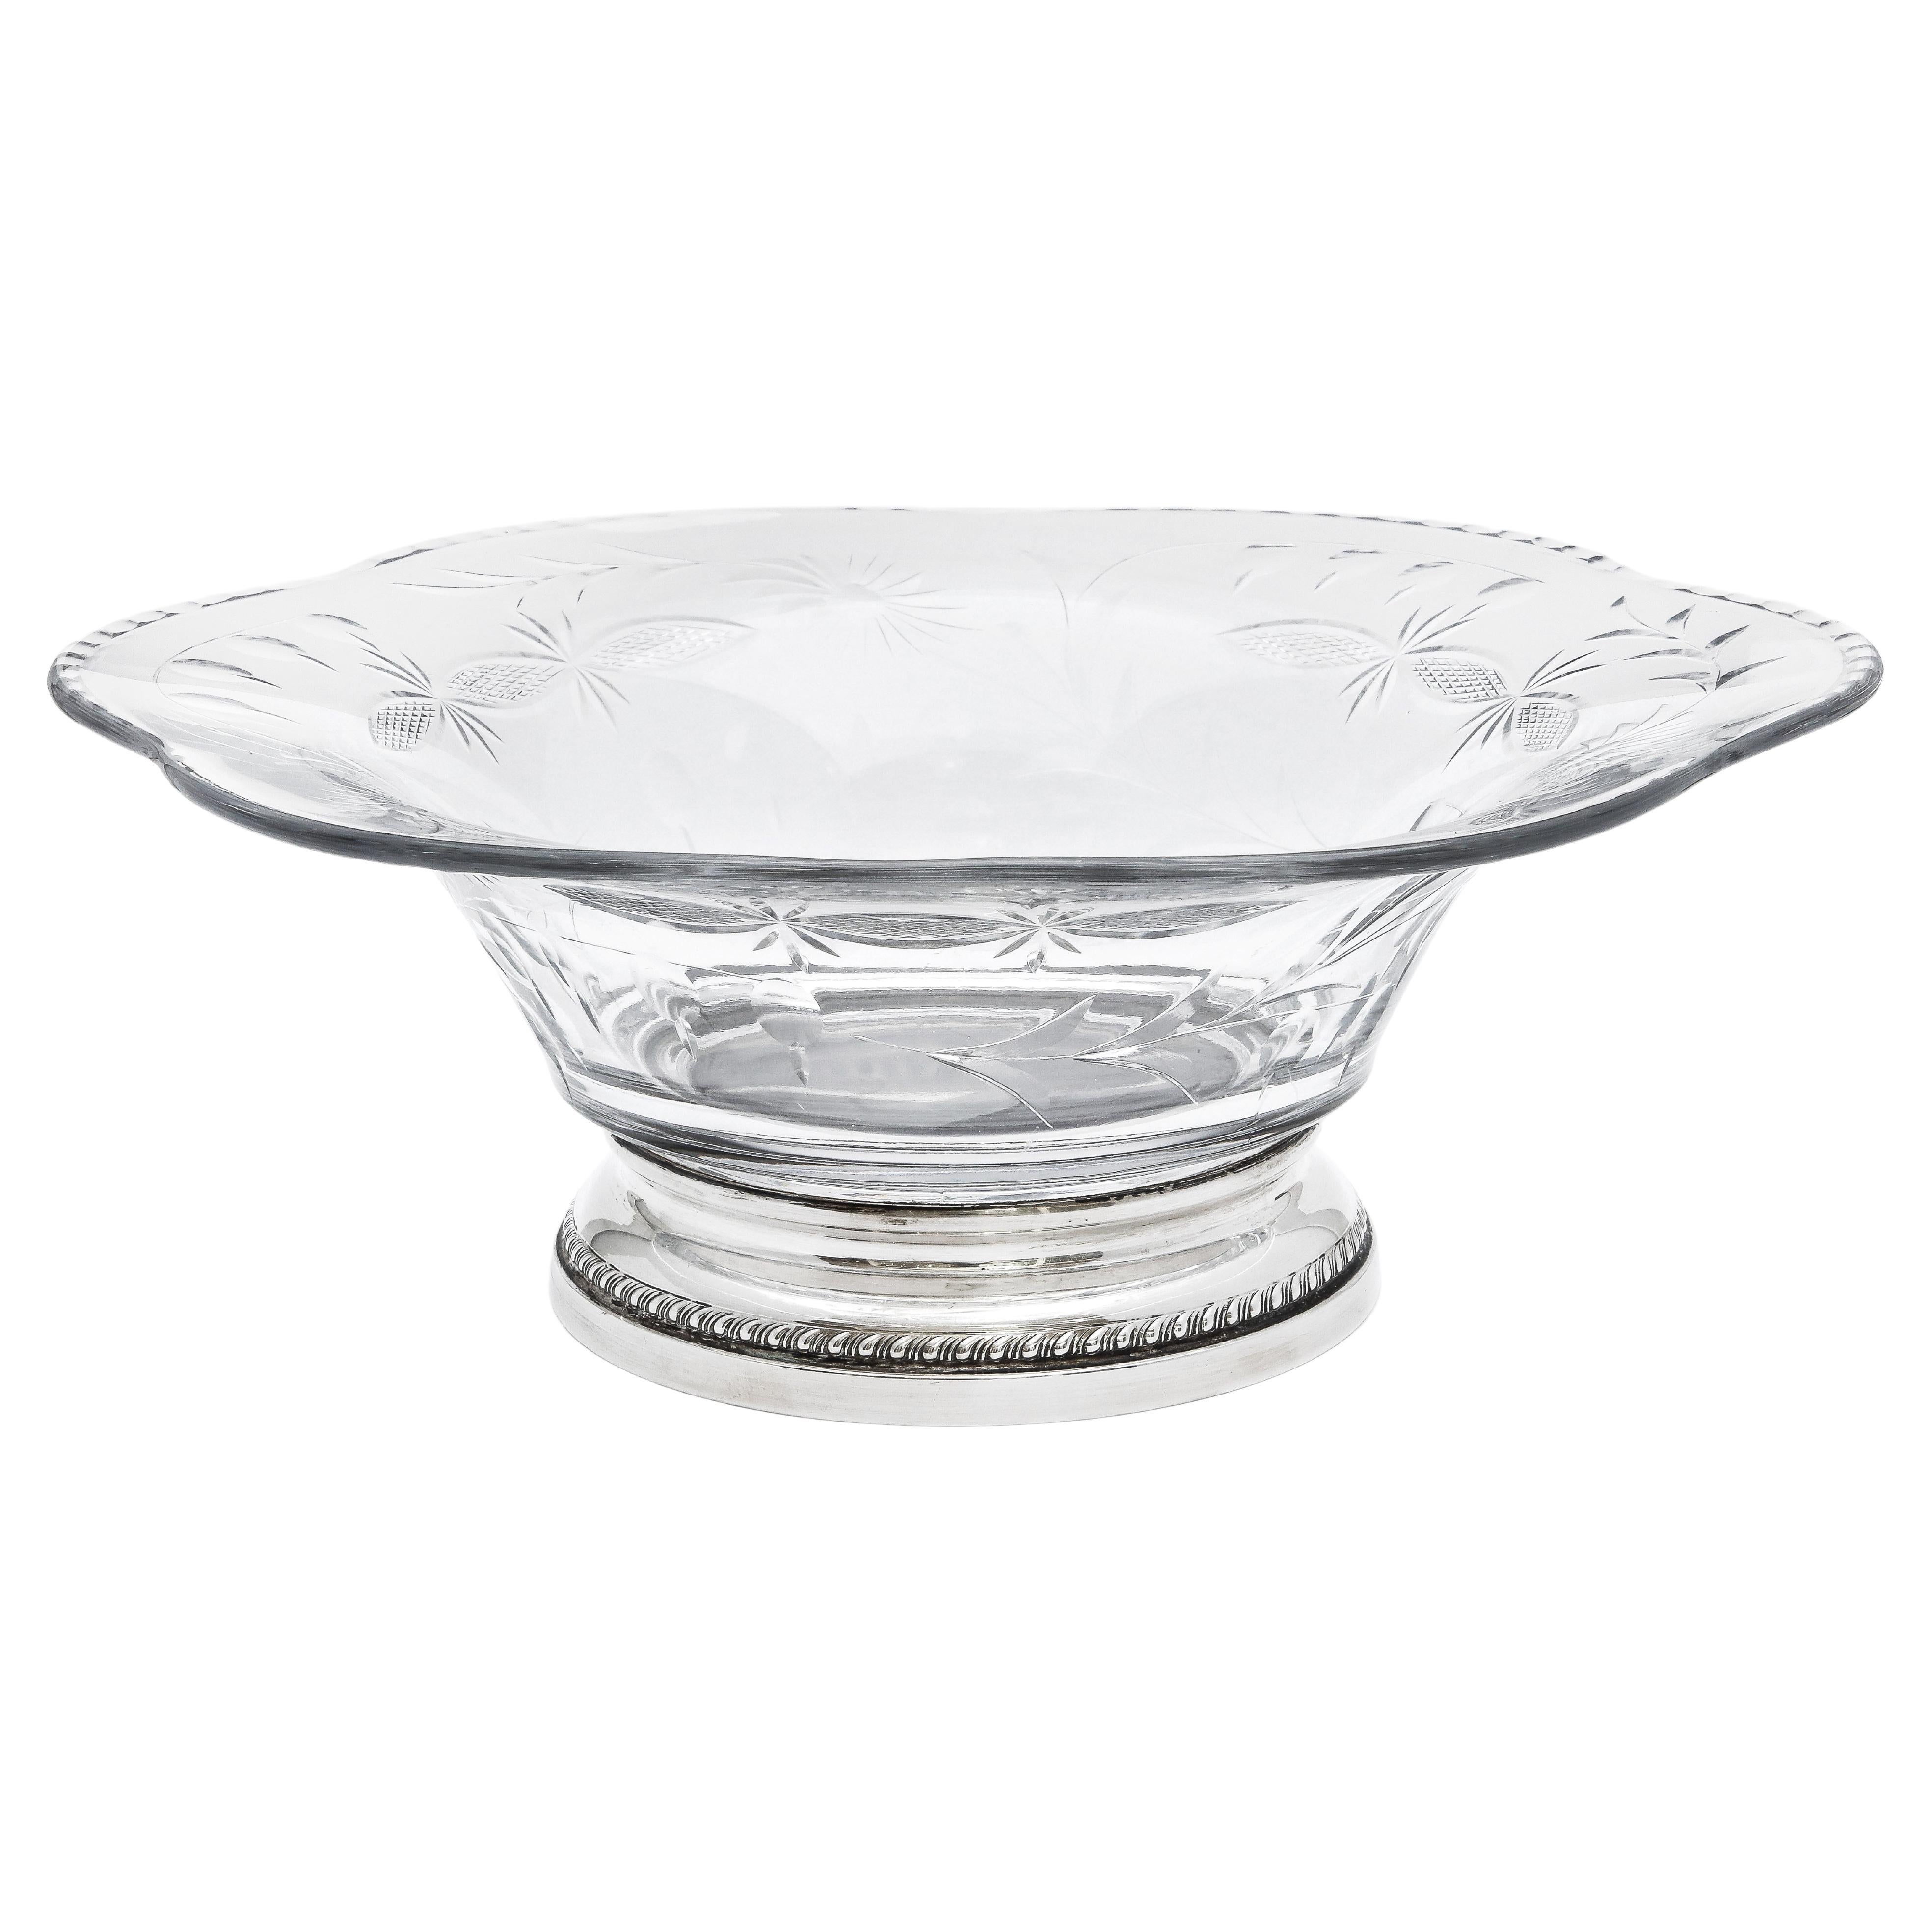 Edwardian Style Sterling Silver-Mounted Wheel-Cut Glass Centerpiece Bowl For Sale